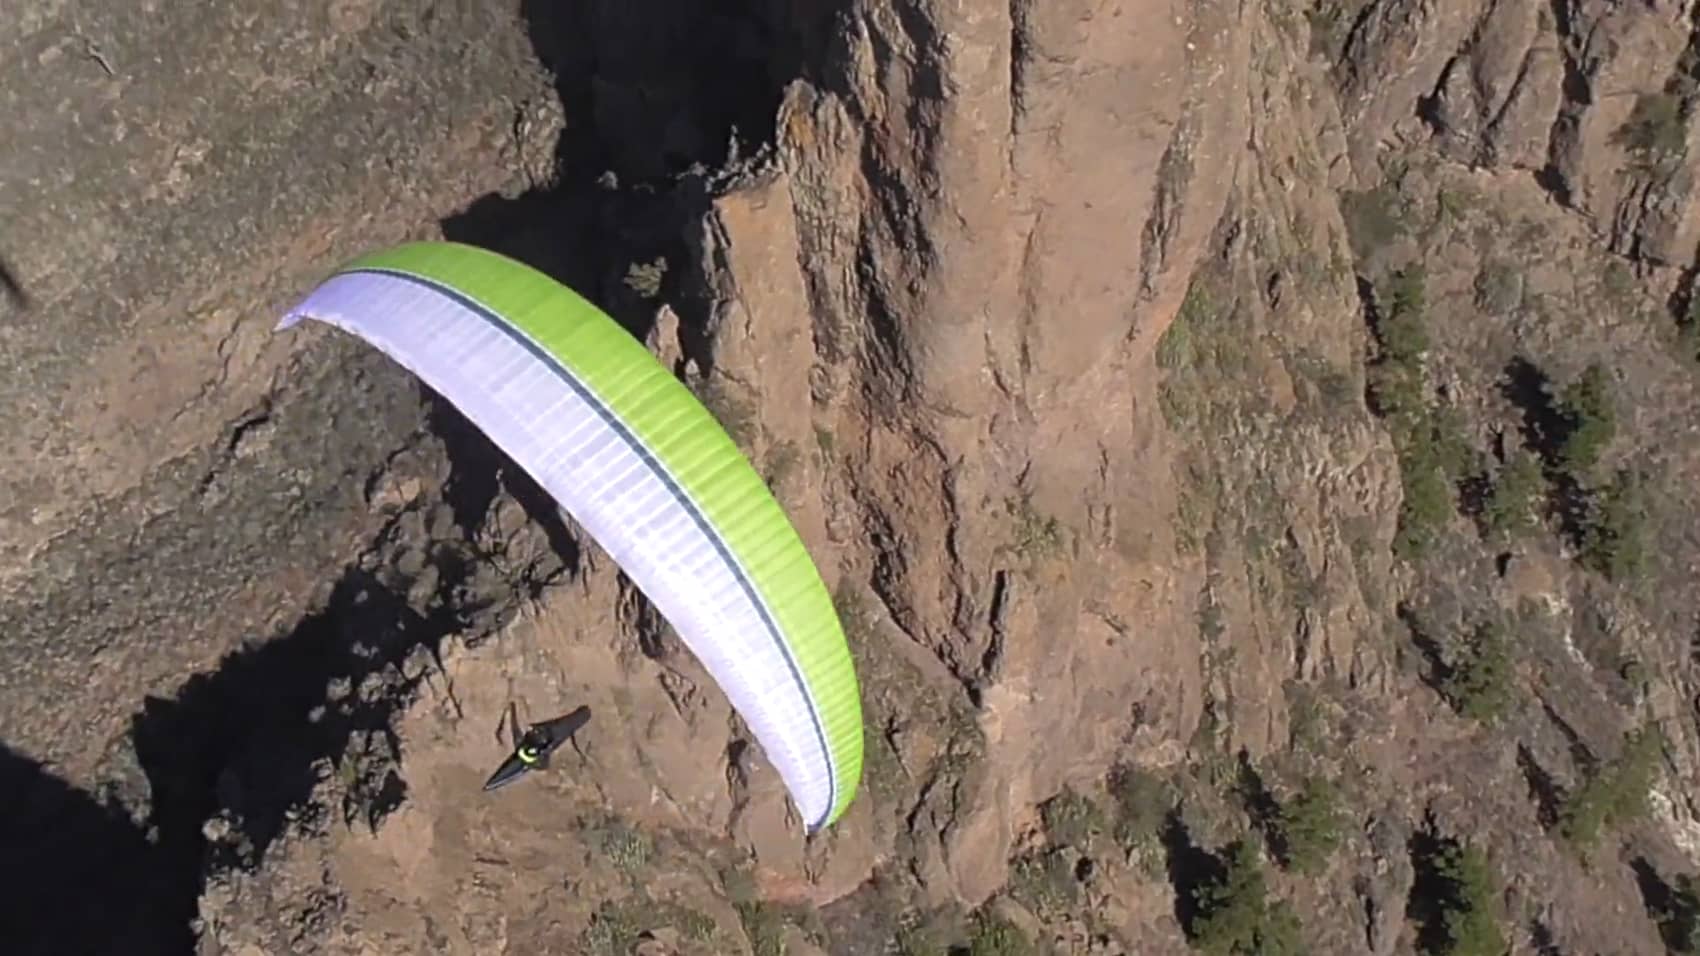 XC PARAGLIDING (CROSS COUNTRY)